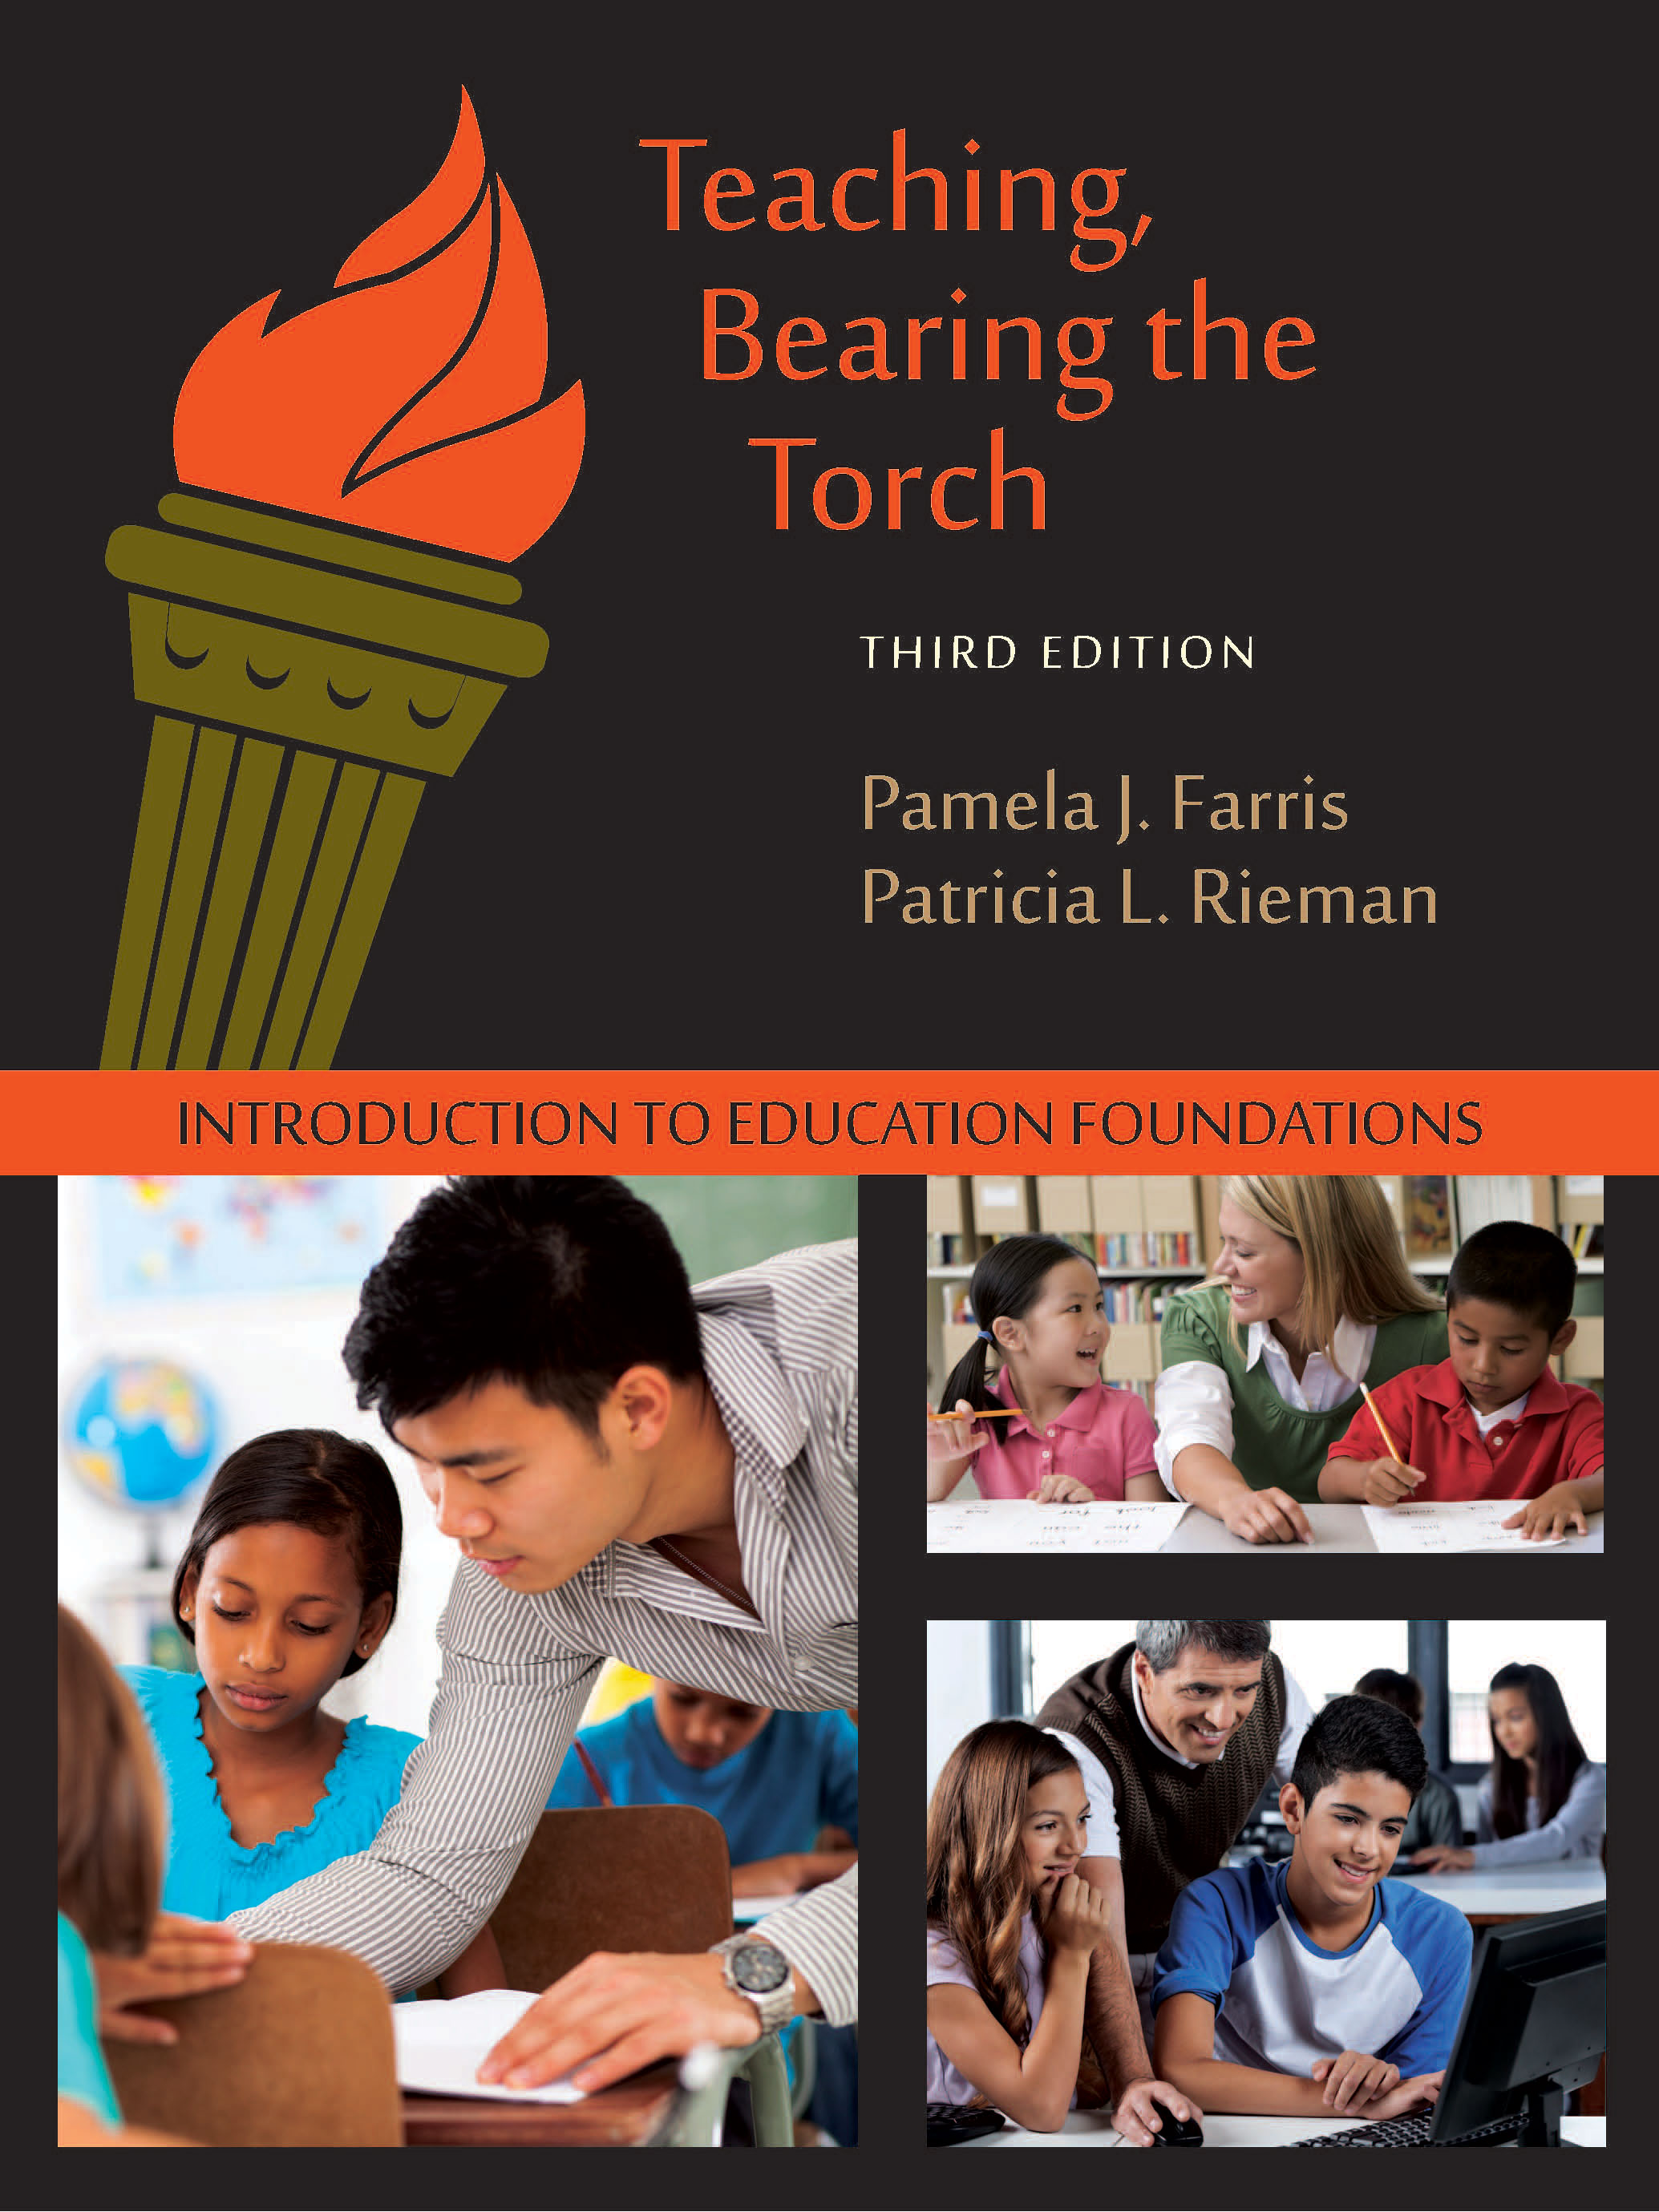 Teaching, Bearing the Torch: Introduction to Education Foundations by Pamela J. Farris, Patricia L. Rieman